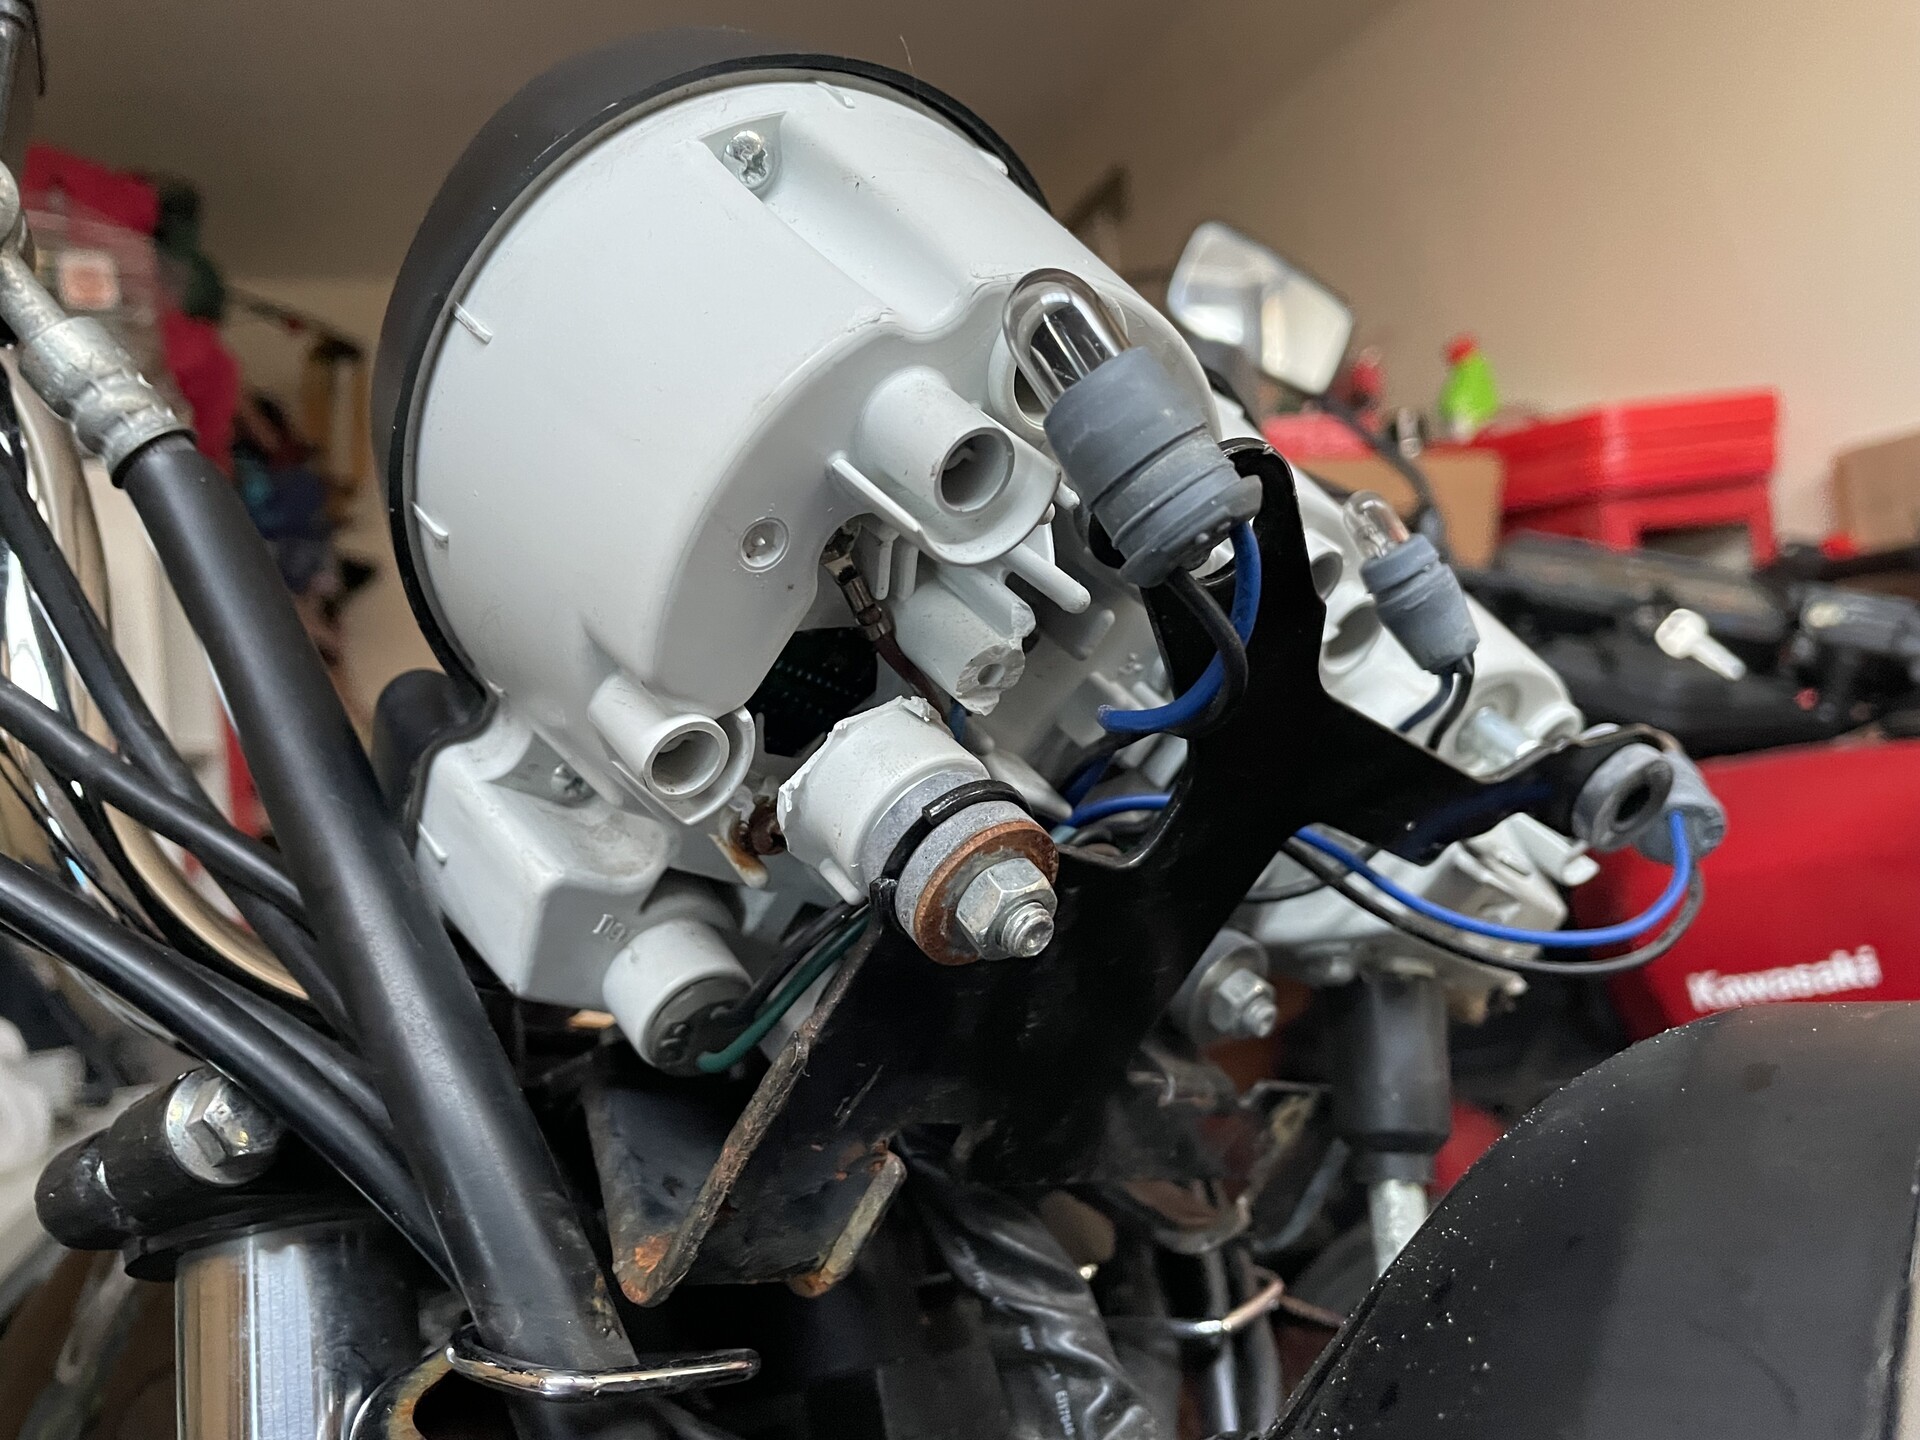 A bunch of wires coming out of the back of the instrument cluster on our Yamaha YBR.